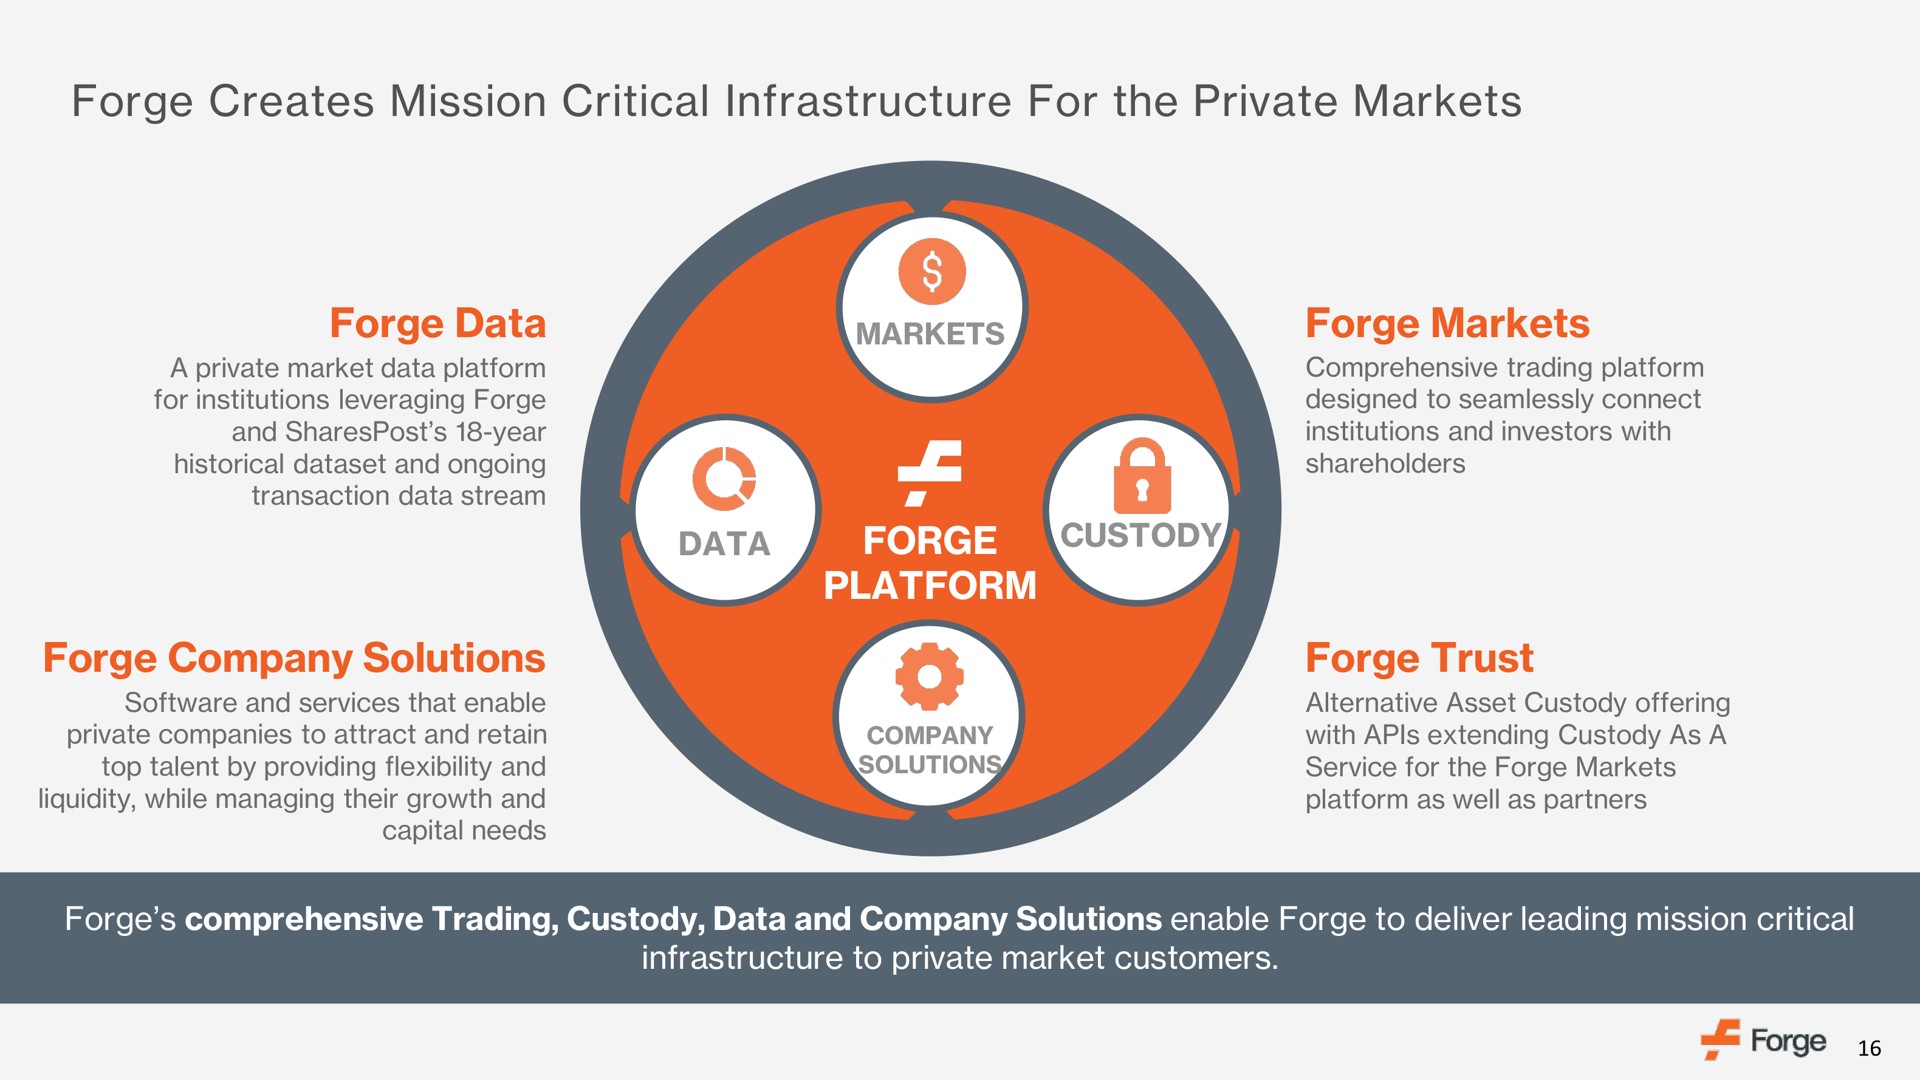 forge creates mission critical infrastructure for the private markets forge data forge markets forge platform forge company solutions forge trust a | Forge